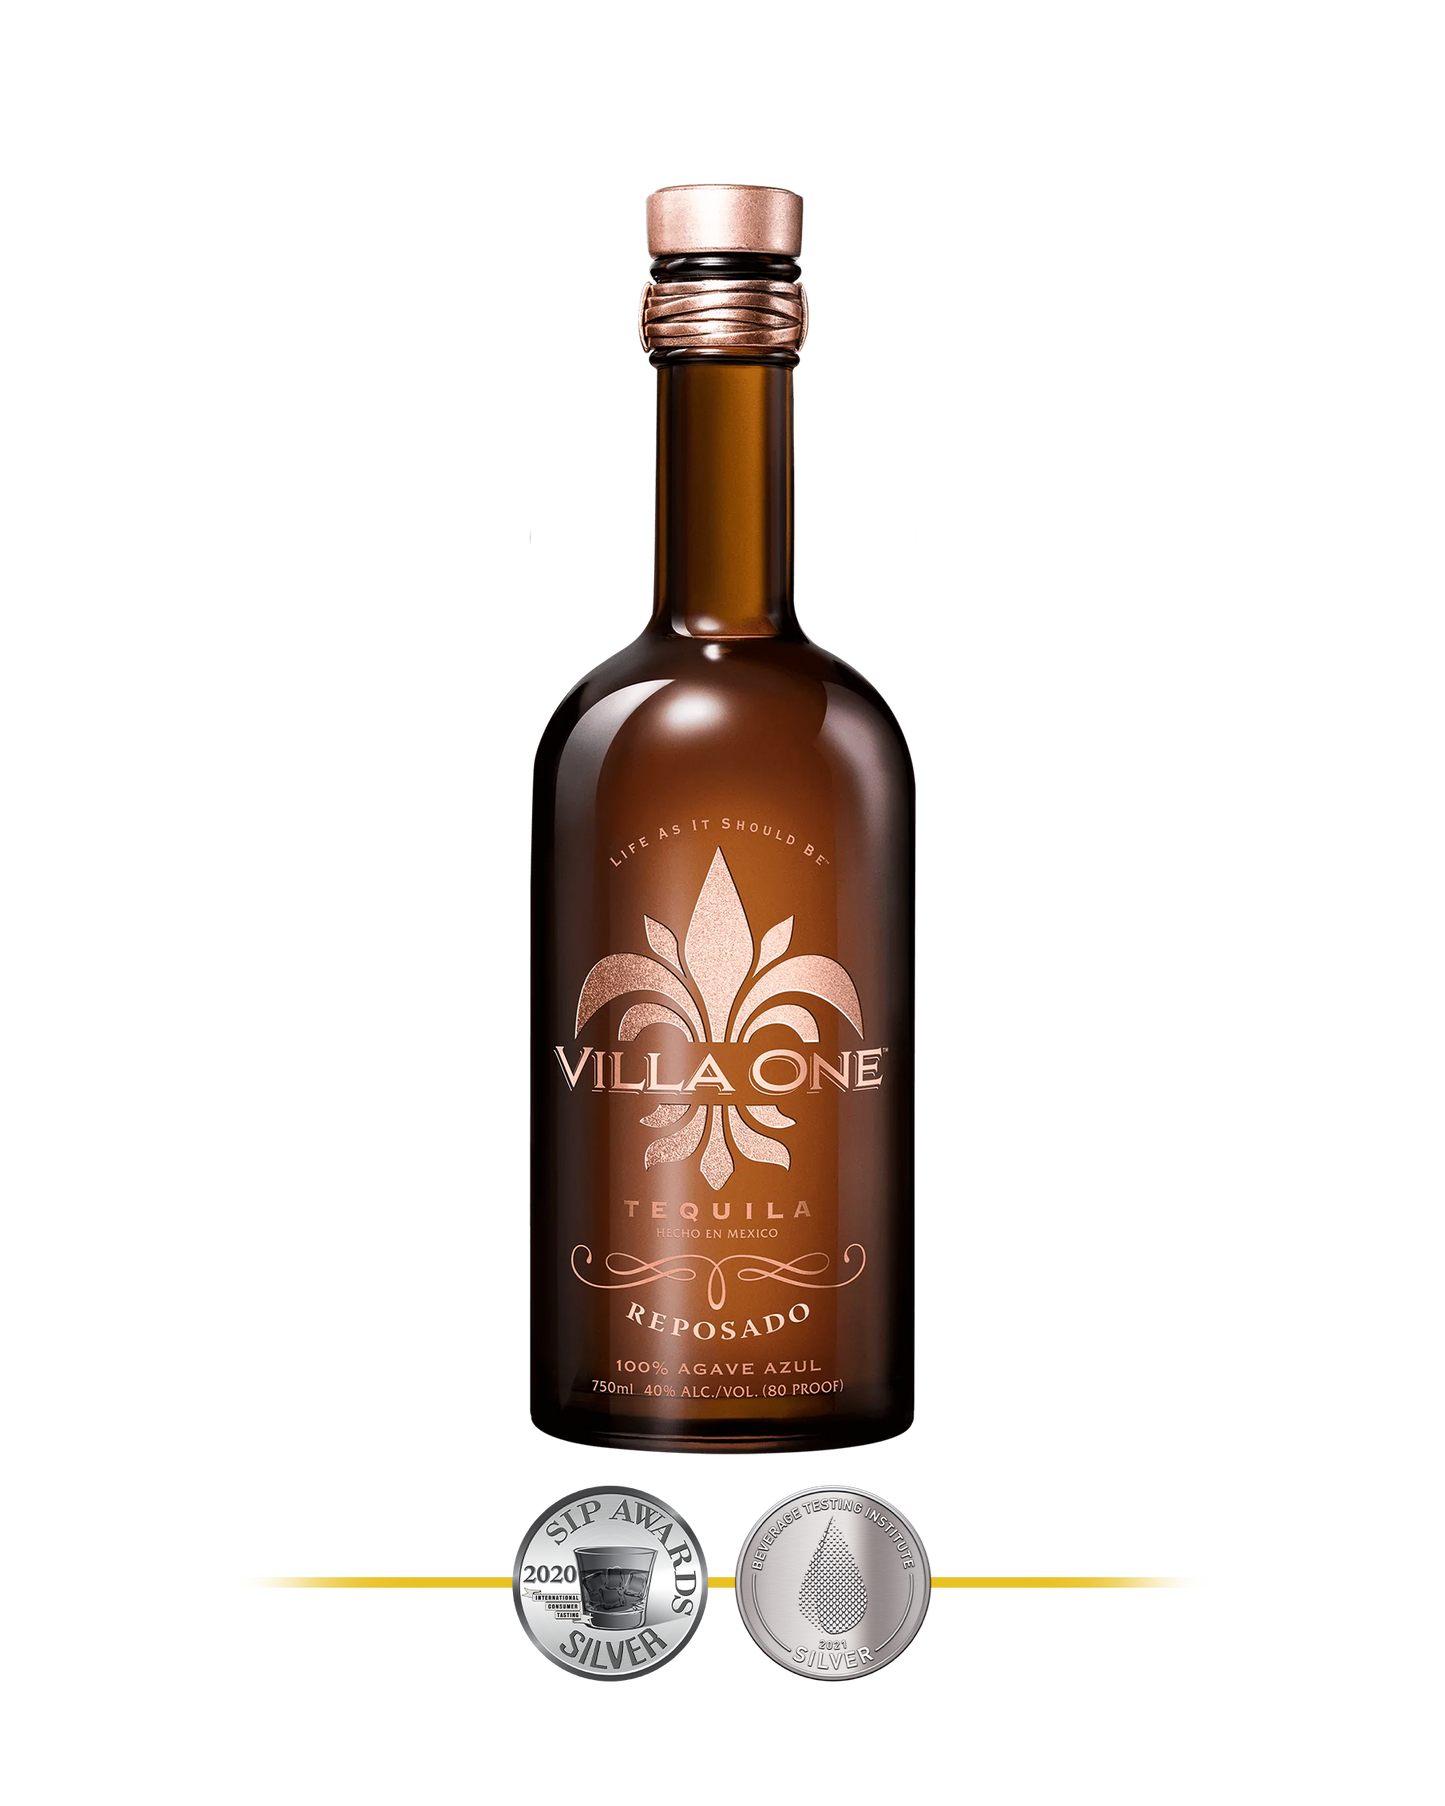 Villa One Tequila Reposado, winner of the SIP Awards Silver and the BTI Awards Silver